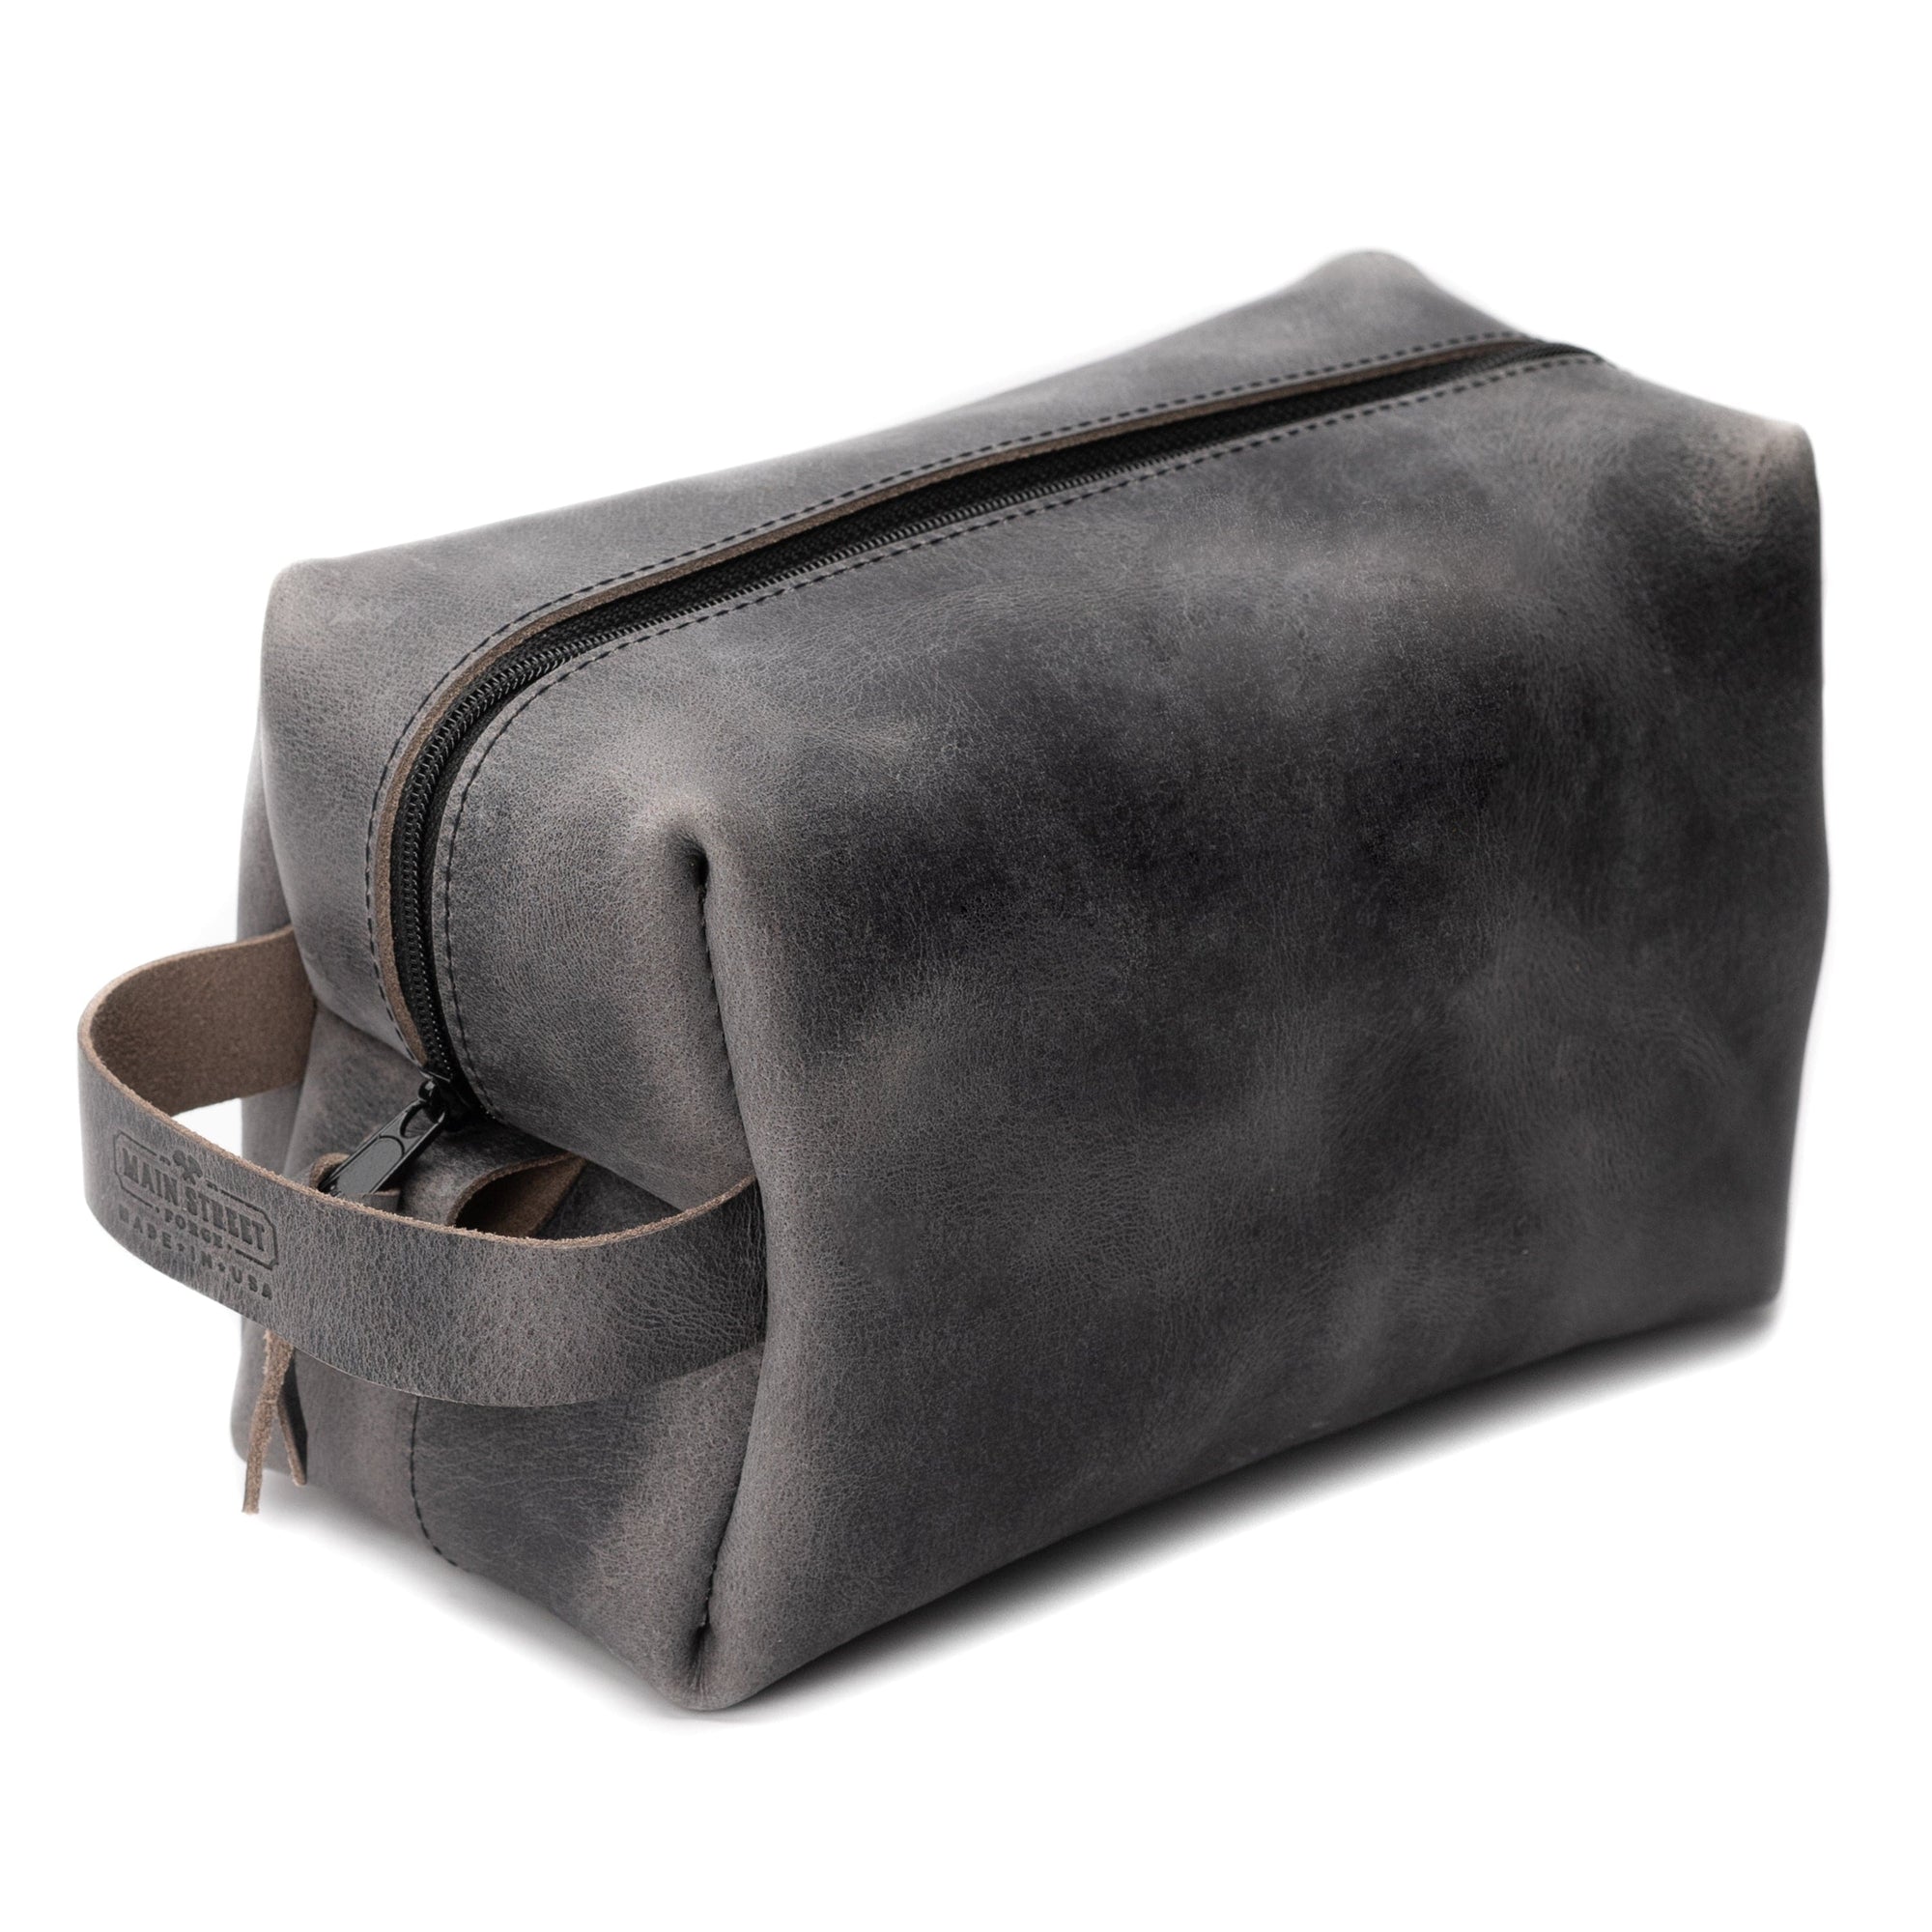 Main Street Forge Avalanche Gray Premium Full Grain Leather Toiletry Bag for Men | Made in USA | Travel Pack for Shaving Essentials & Accessories | Compact, Lightweight Mens Bathroom & Shower Case 816895026700